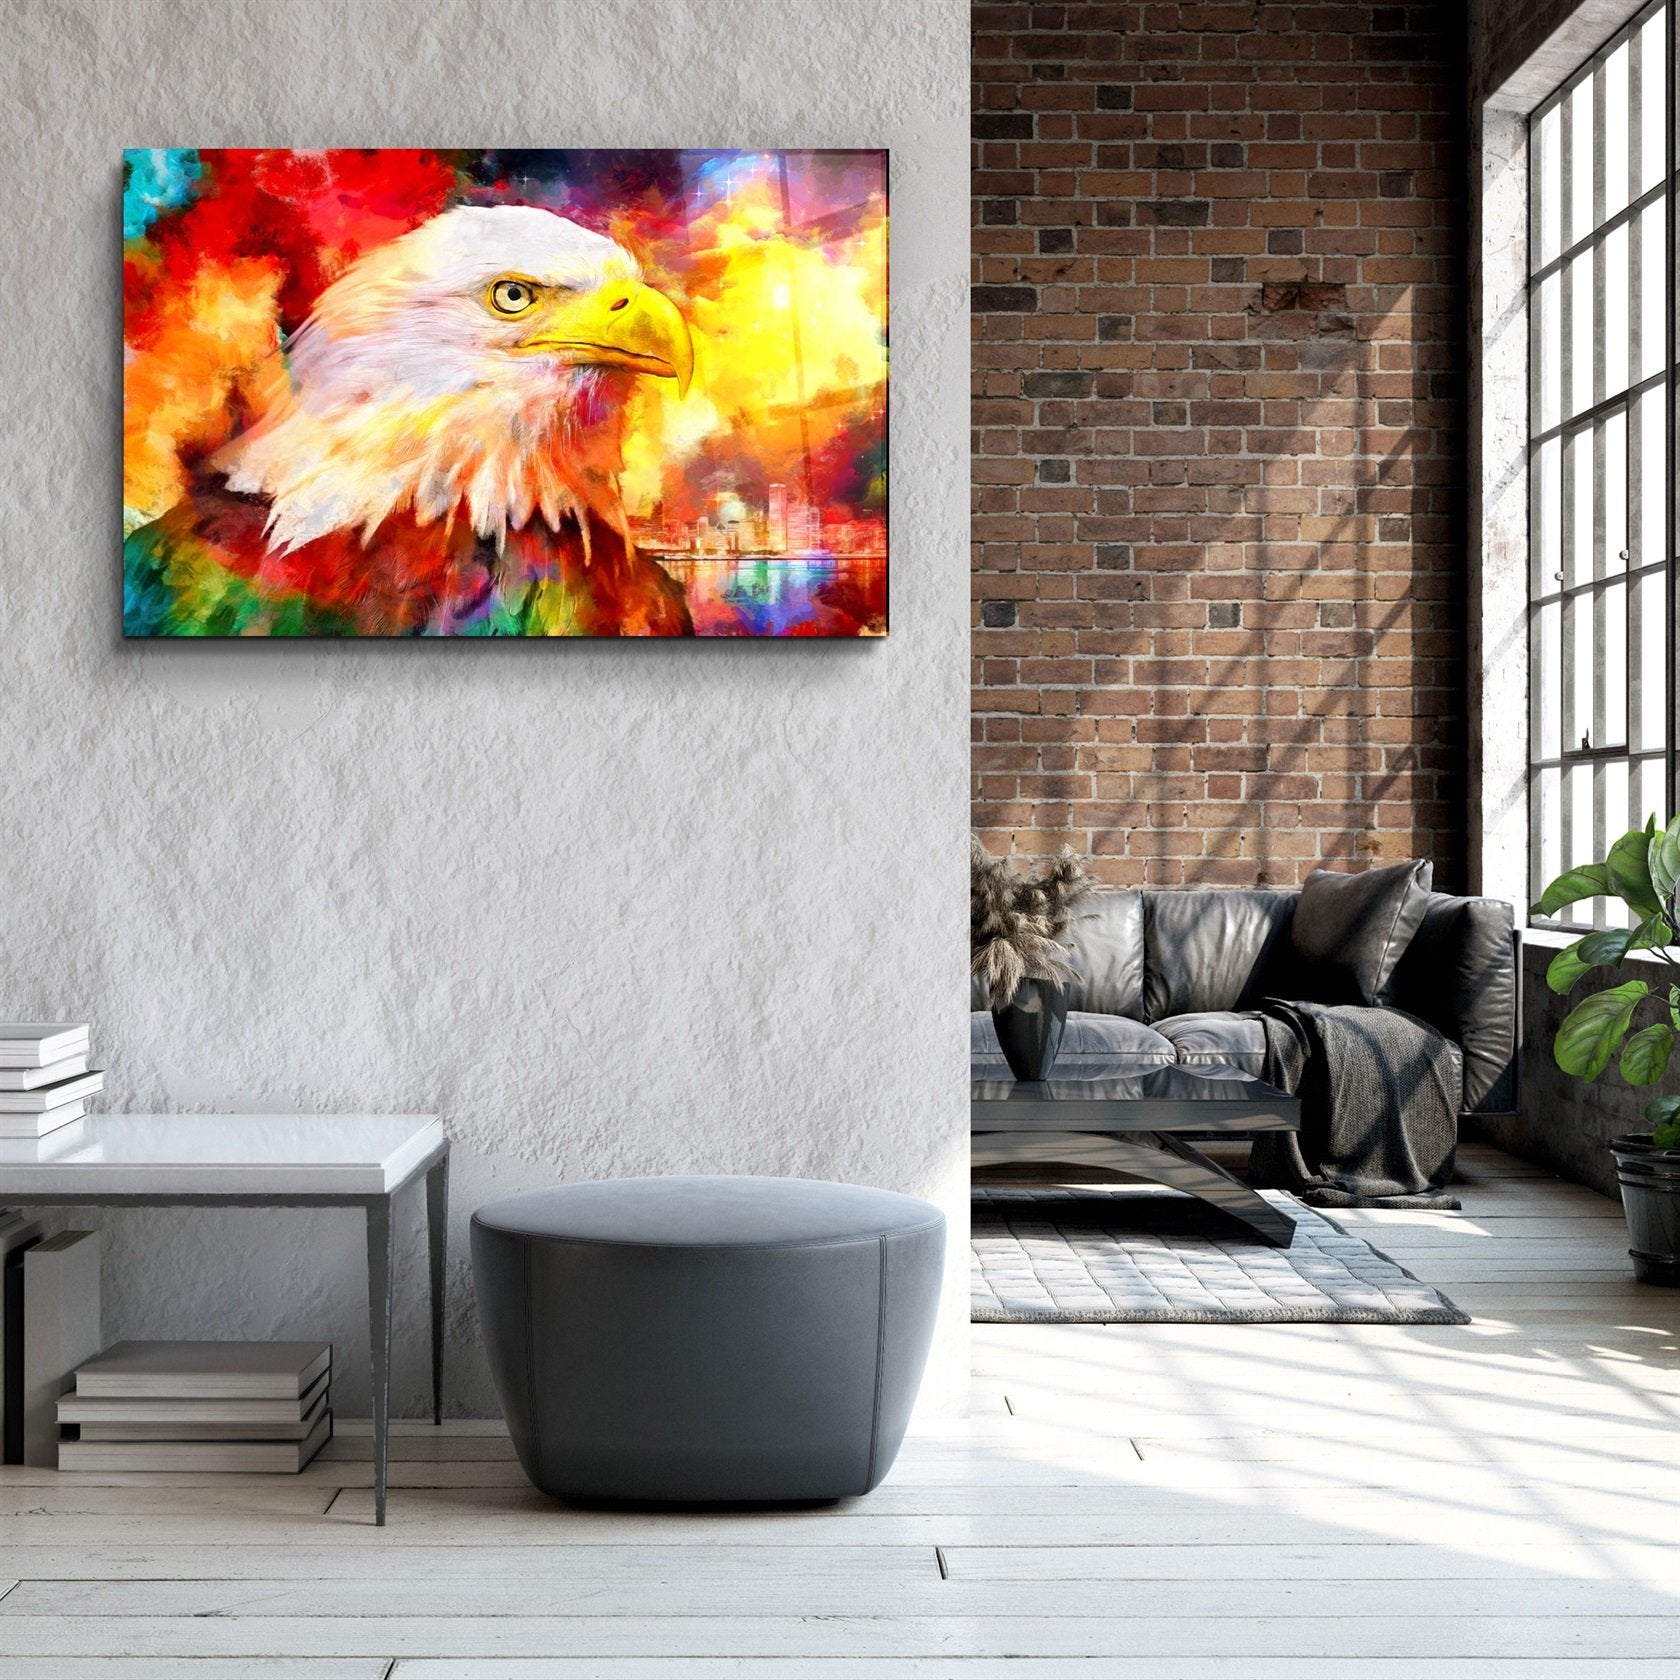 ・"Abstract Colorful Eagle"・Glass Wall Art